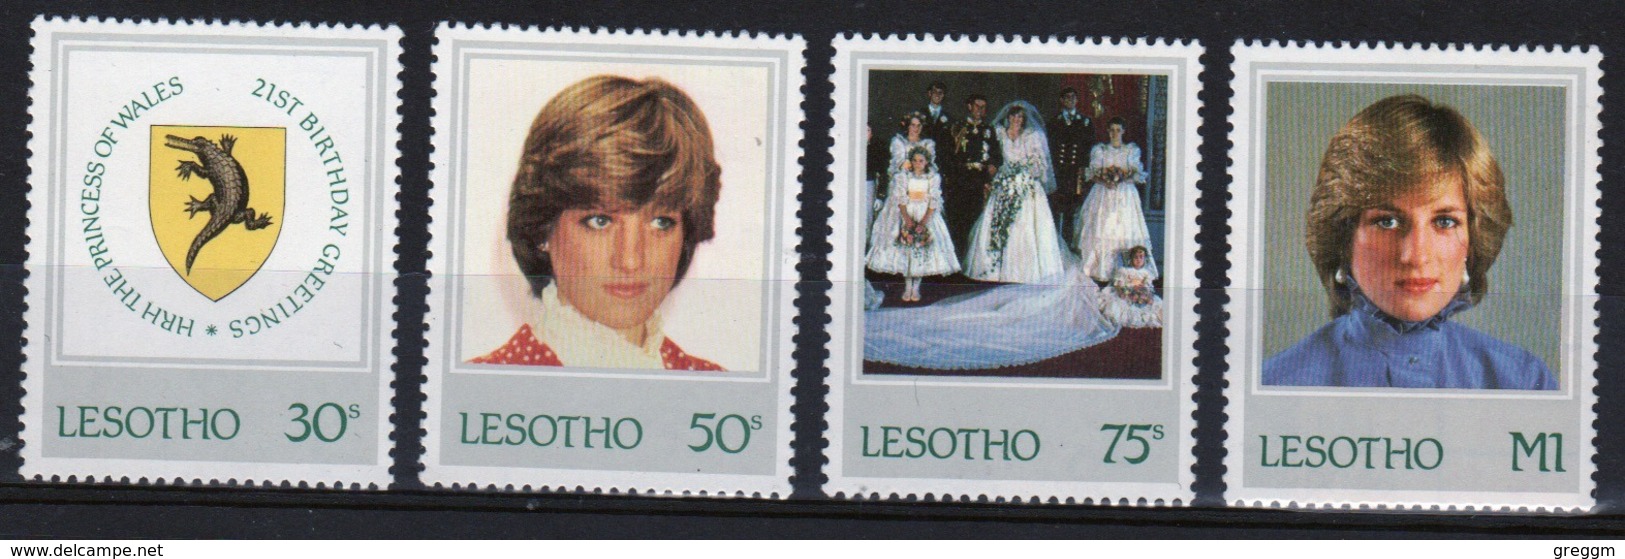 Lesotho 1982 21st Birthday Of Princess Diana Unmounted Mint Set Of Four Stamps. - Lesotho (1966-...)